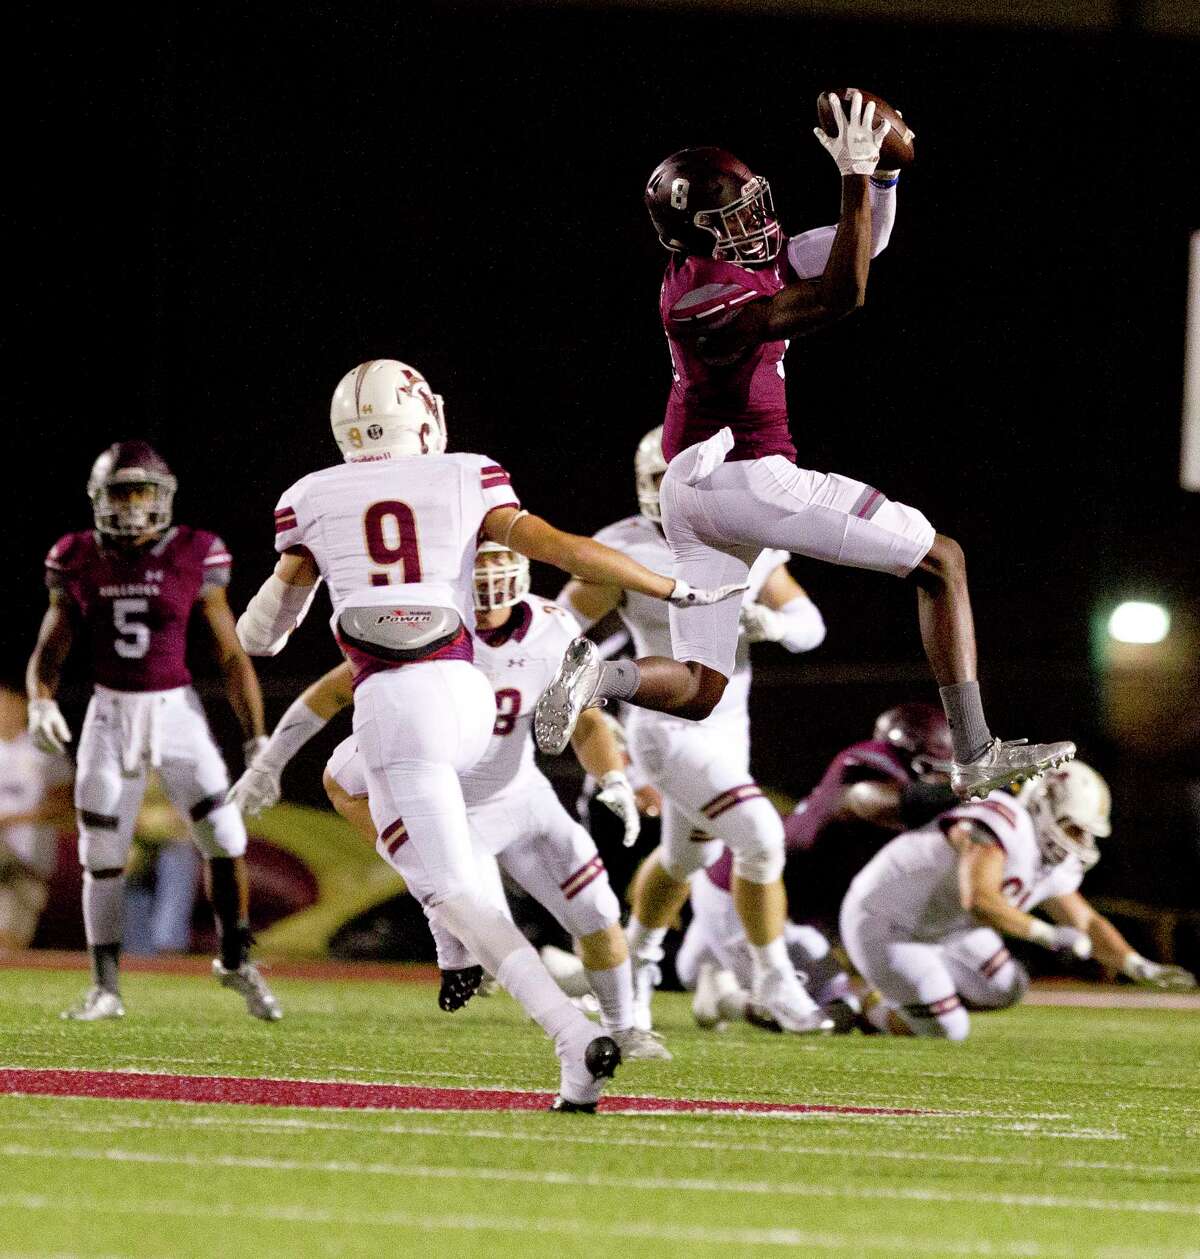 Magnolia wide receiver Michael Woods (8) catches a high pass from quarterback Reese Mason during the first quarter of a District 20-5A high school football game, Friday Oct. 20, 2017, in Magnolia.